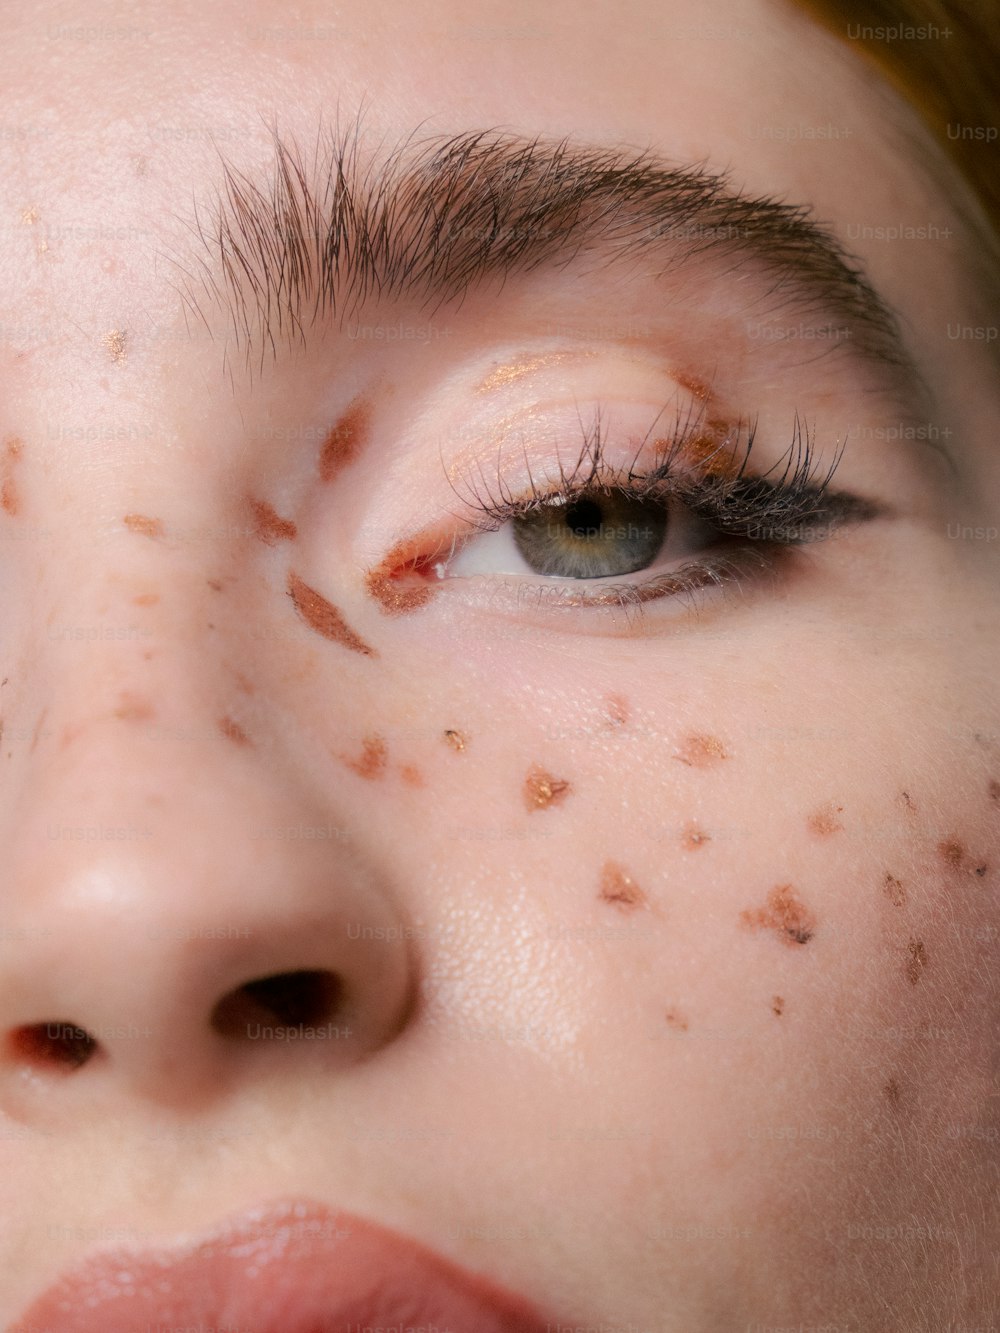 a close up of a woman with acne on her face